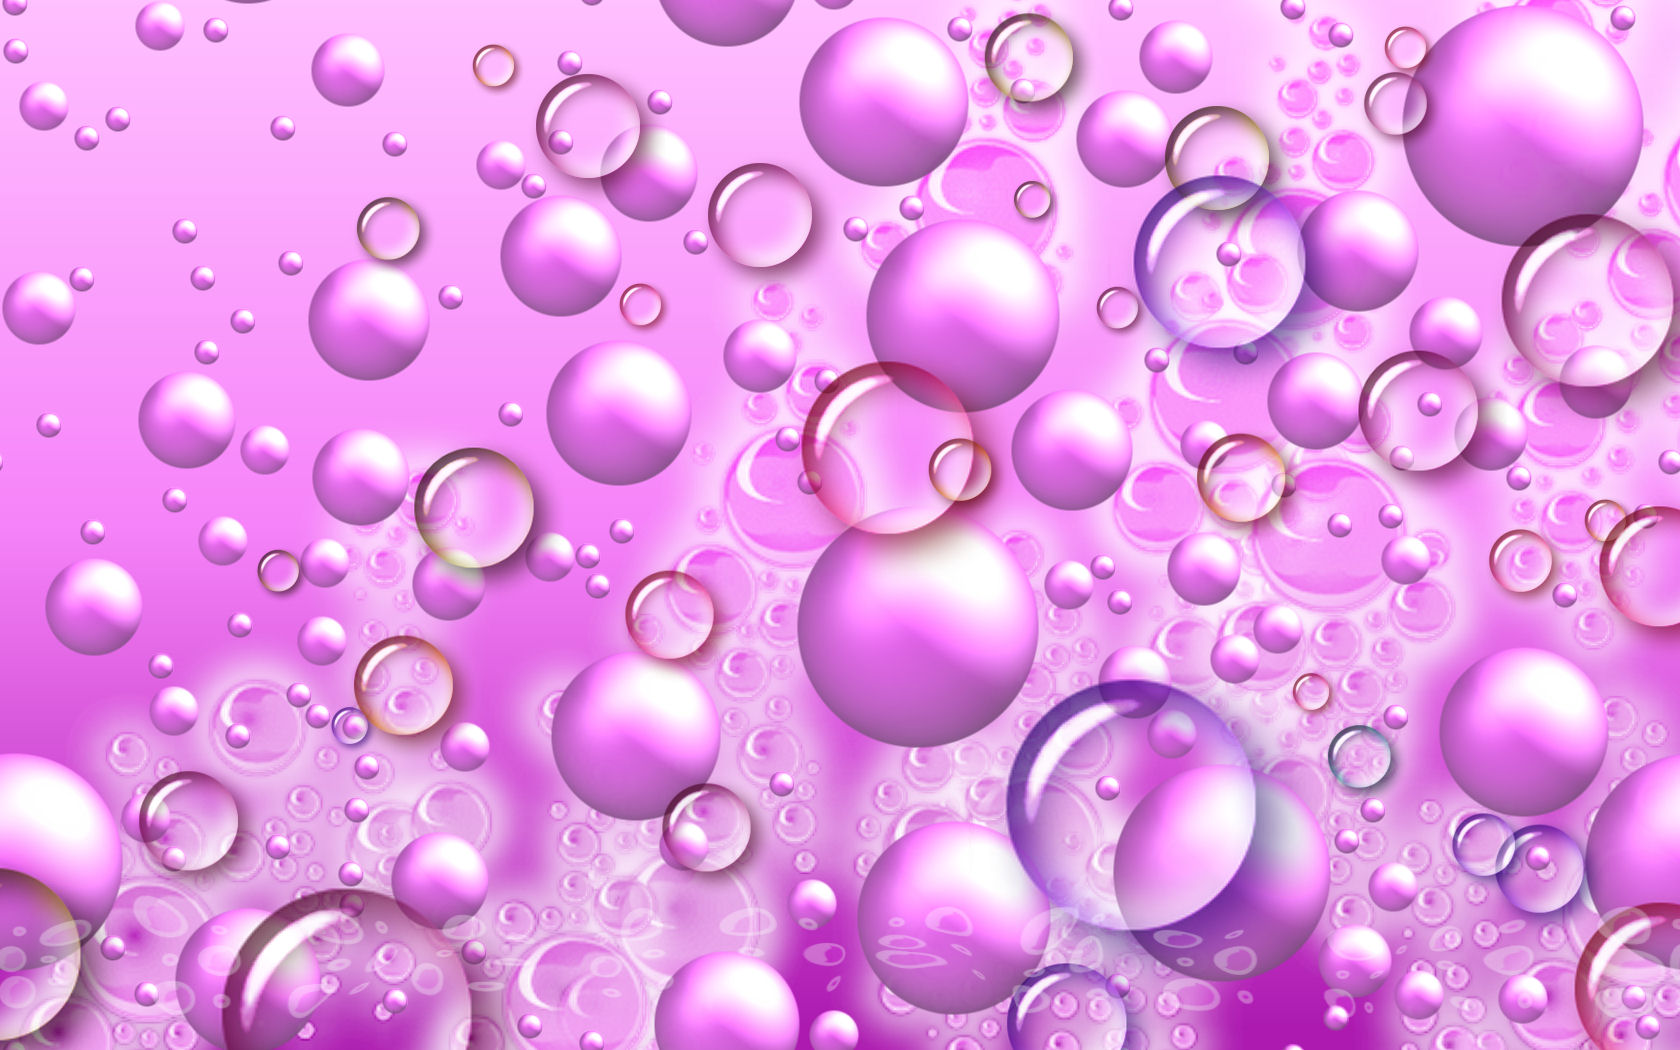 Gallery For Gt Pink Bubbles Wallpaper